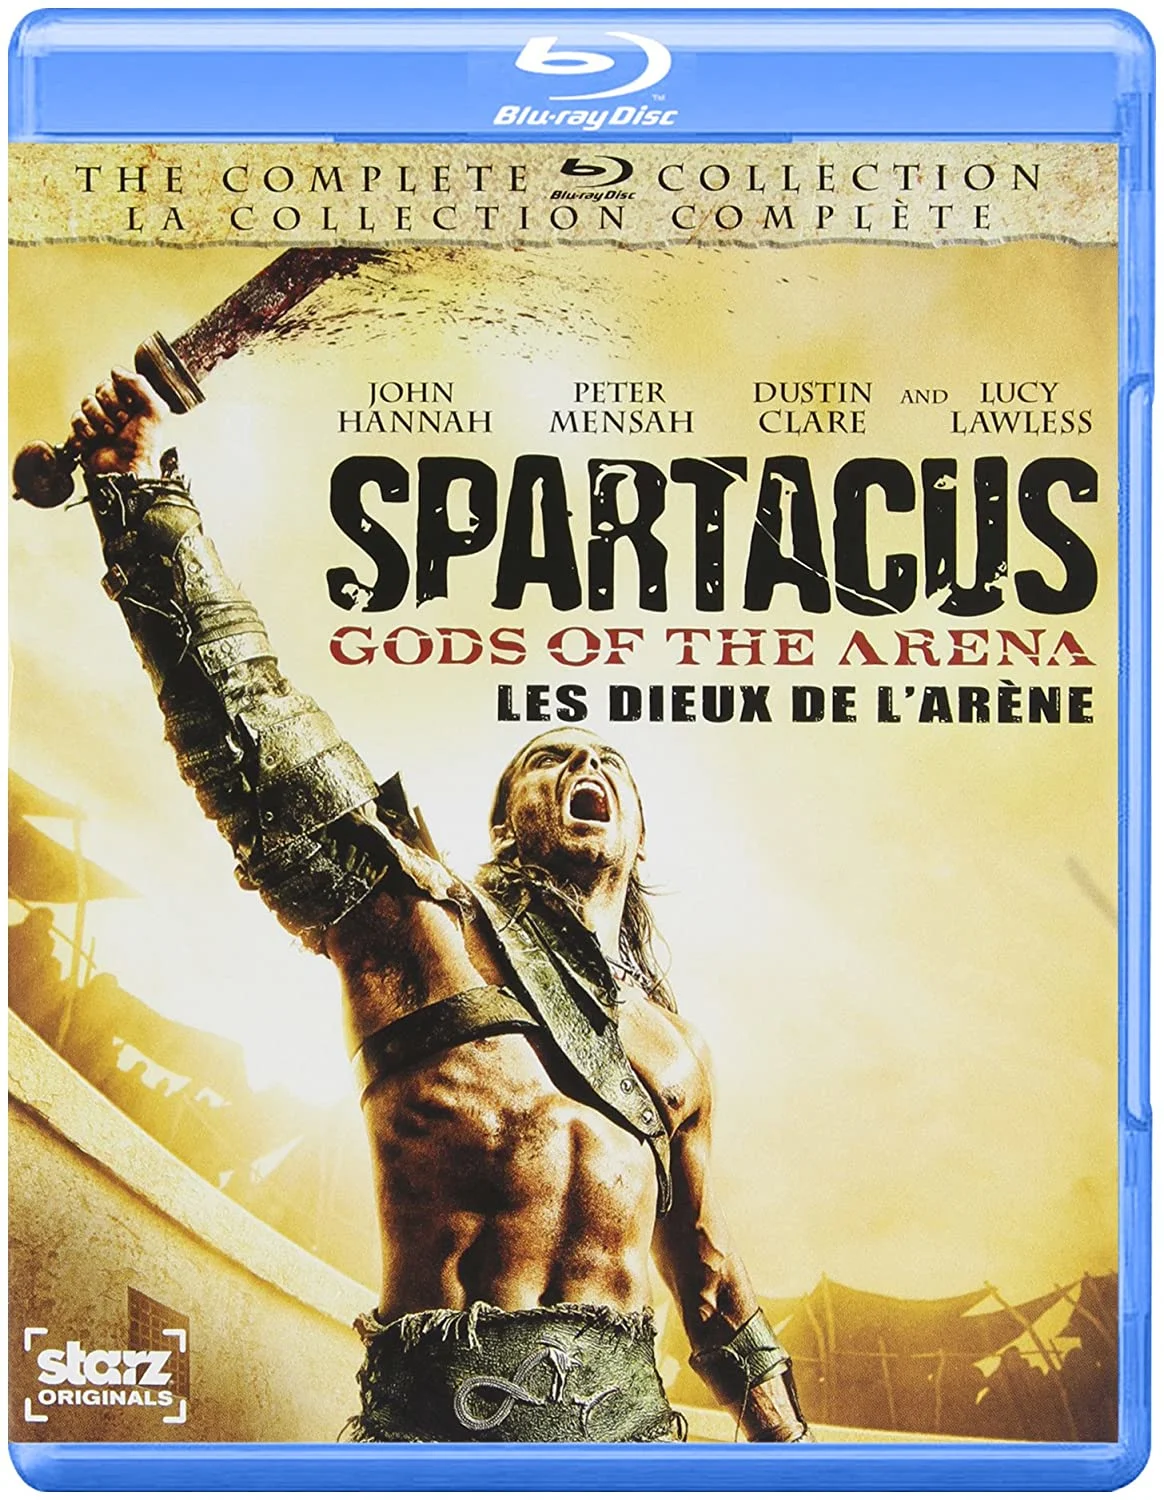 Spartacus: Gods of the Arena (Blu-ray) on MovieShack